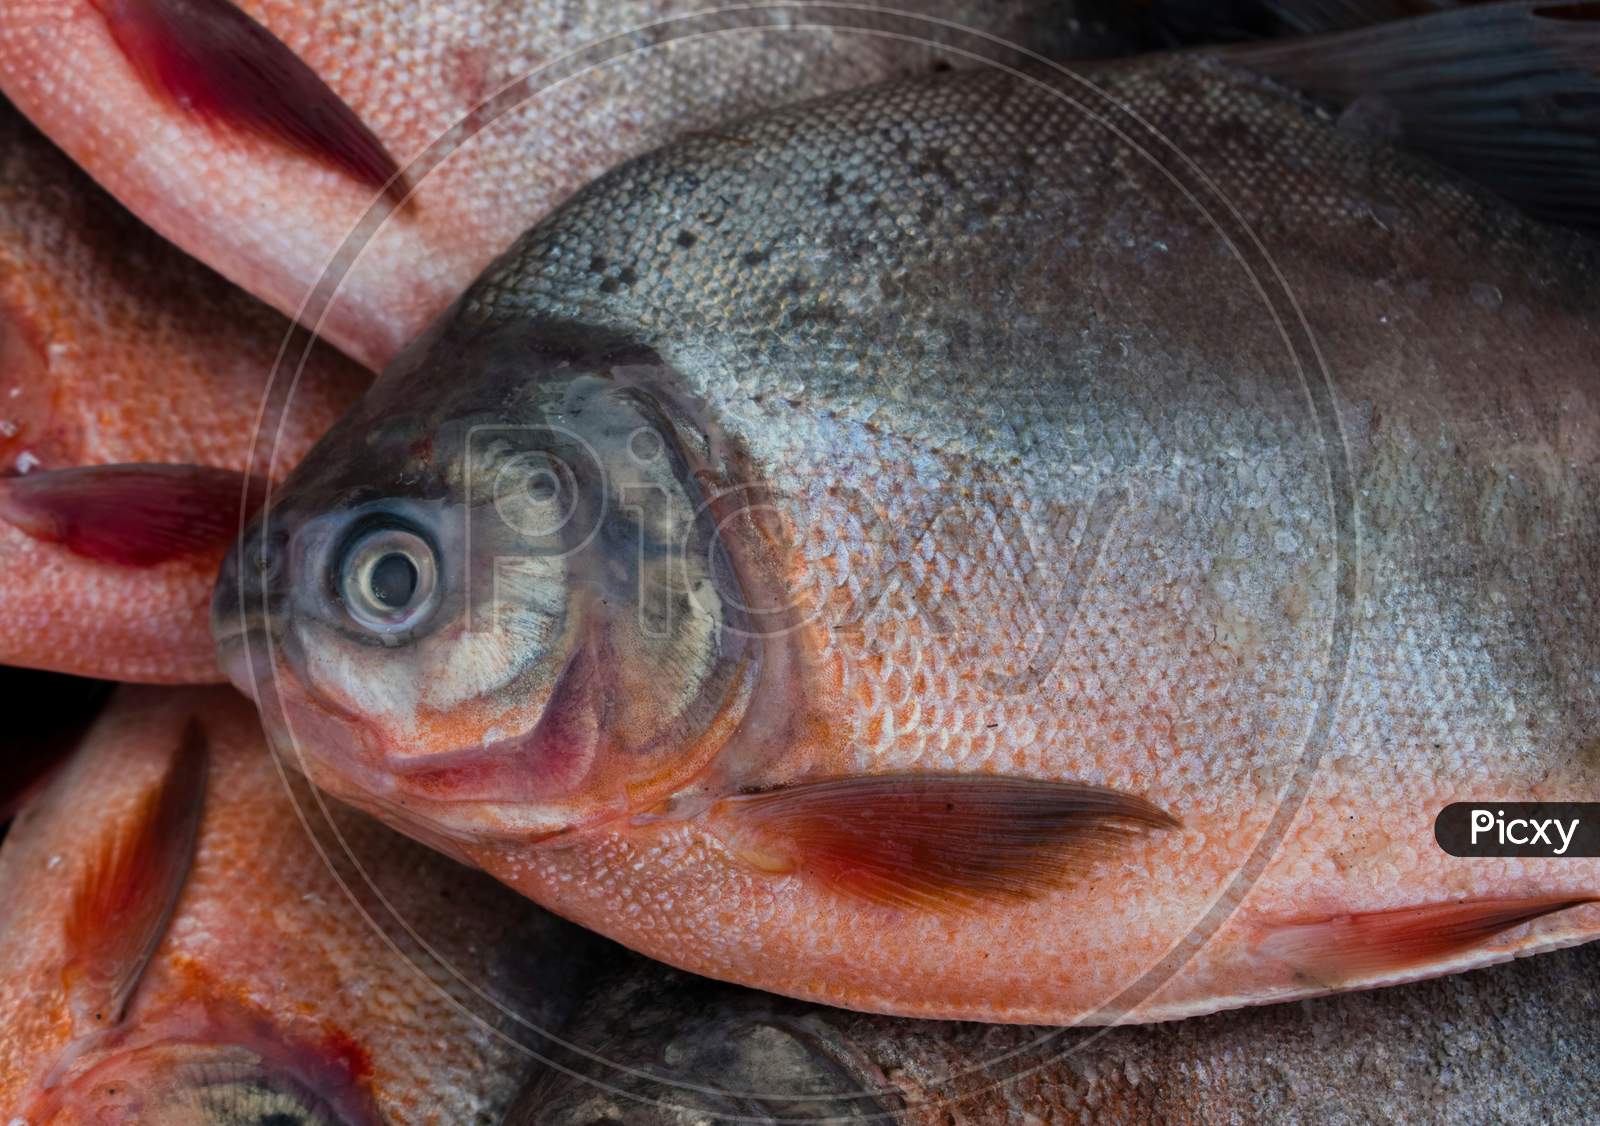 Closeup Shot Of Red-Bellied Pacu Fish.